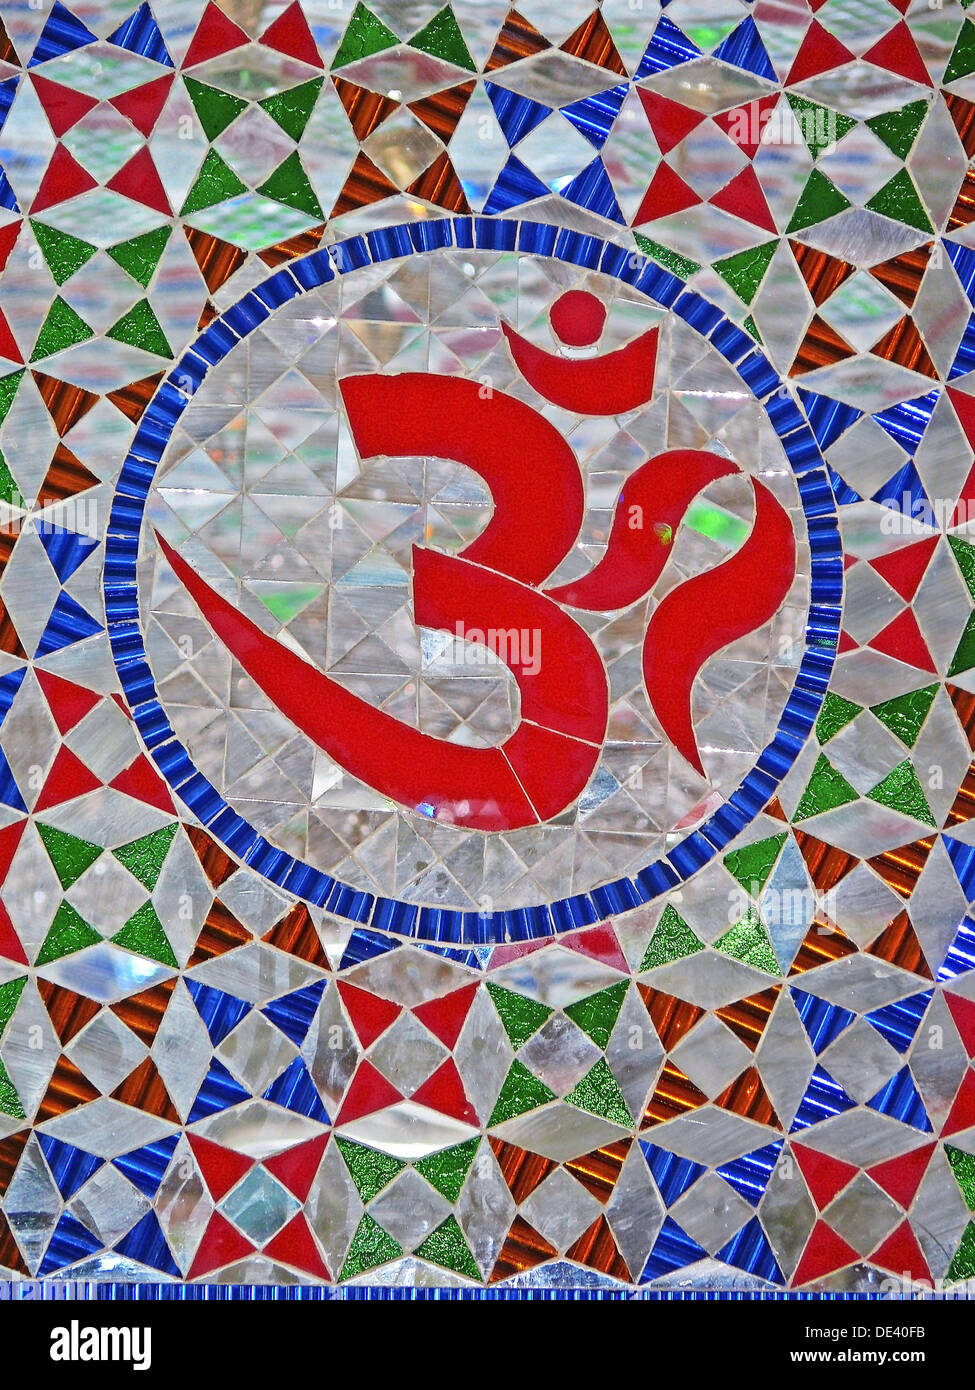 OM symbol of Hinduism, A holy sign called om, cutout in glass in lord Viththal madir,temple, Viththalwadi, withthalwadi, Pune, Stock Photo